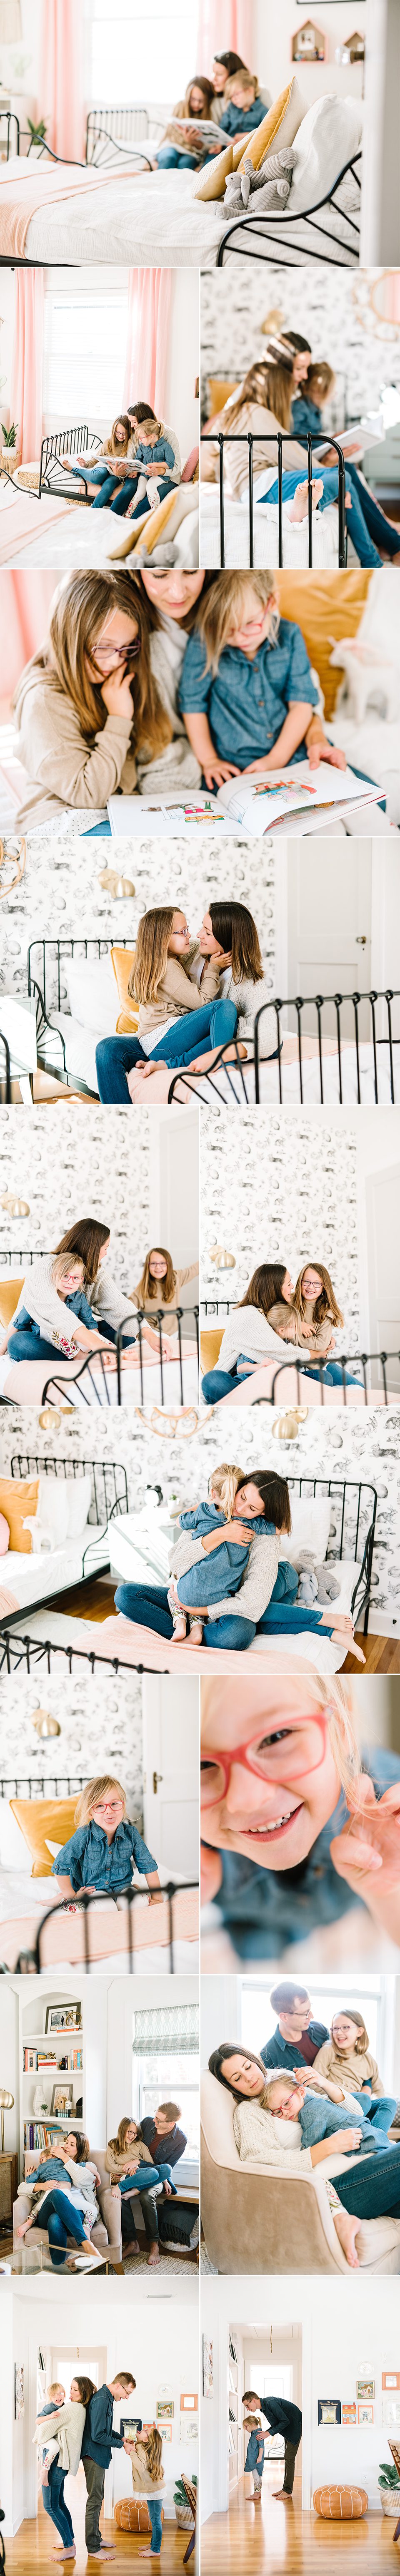 jacksonville-family-photography-in-home-lifestyle